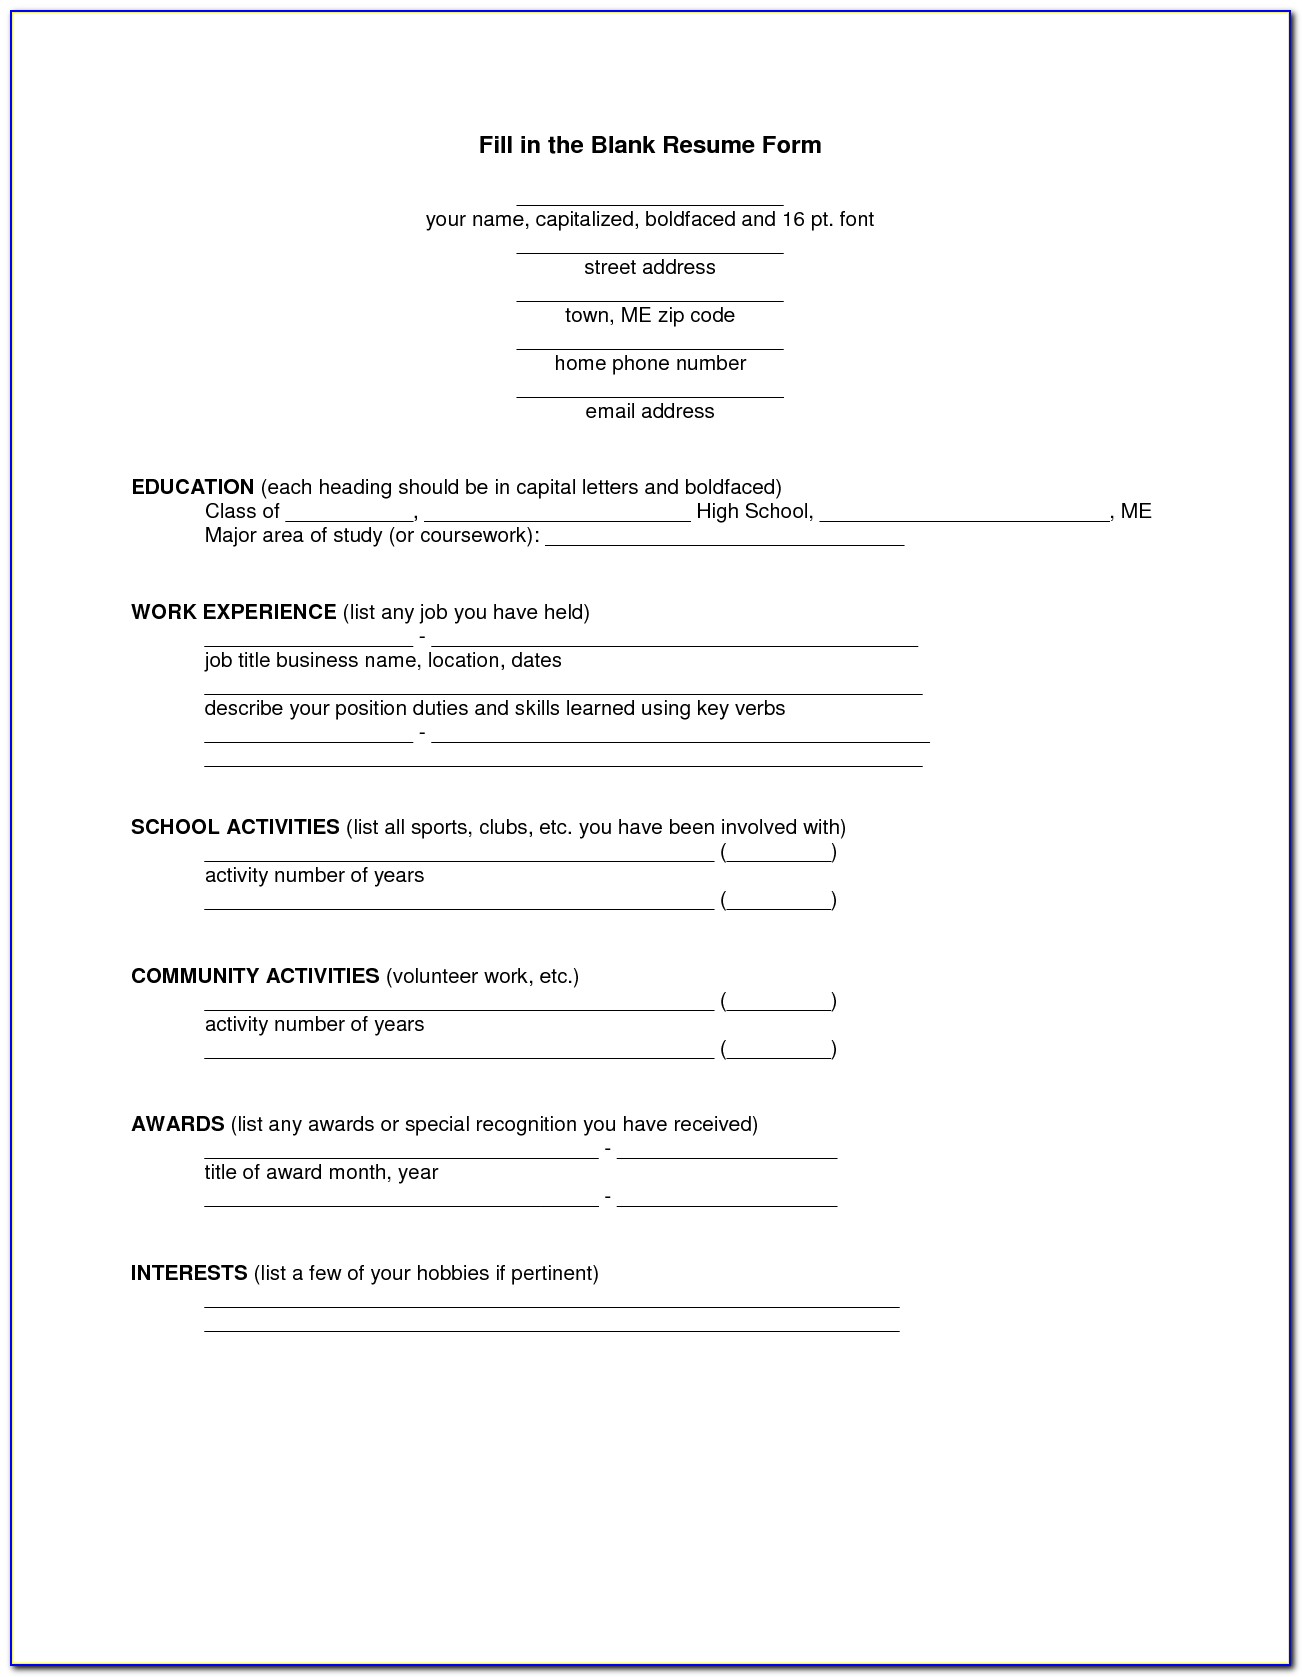 Resume Fill In The Blank Pdf